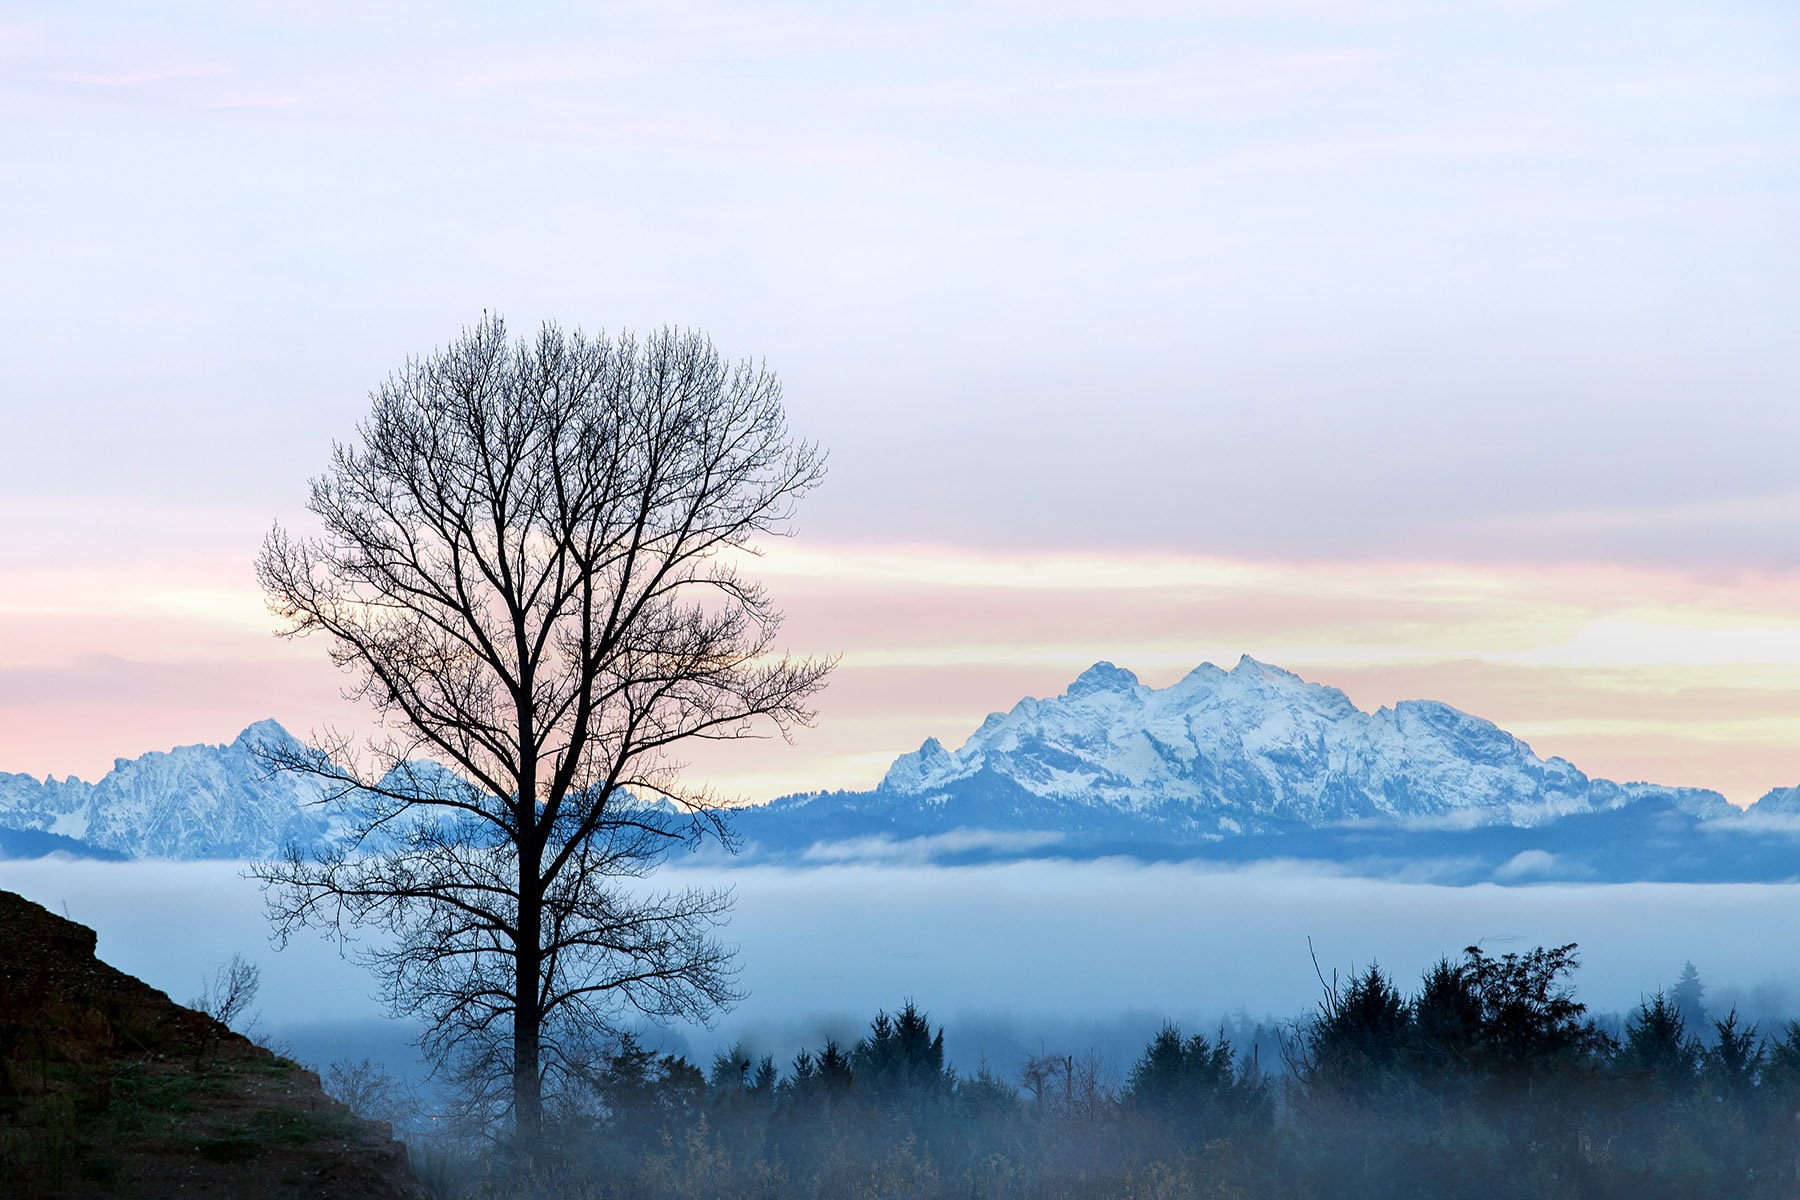 A leafless tree stands against a pastel sunrise with snow-capped mountains in the background.